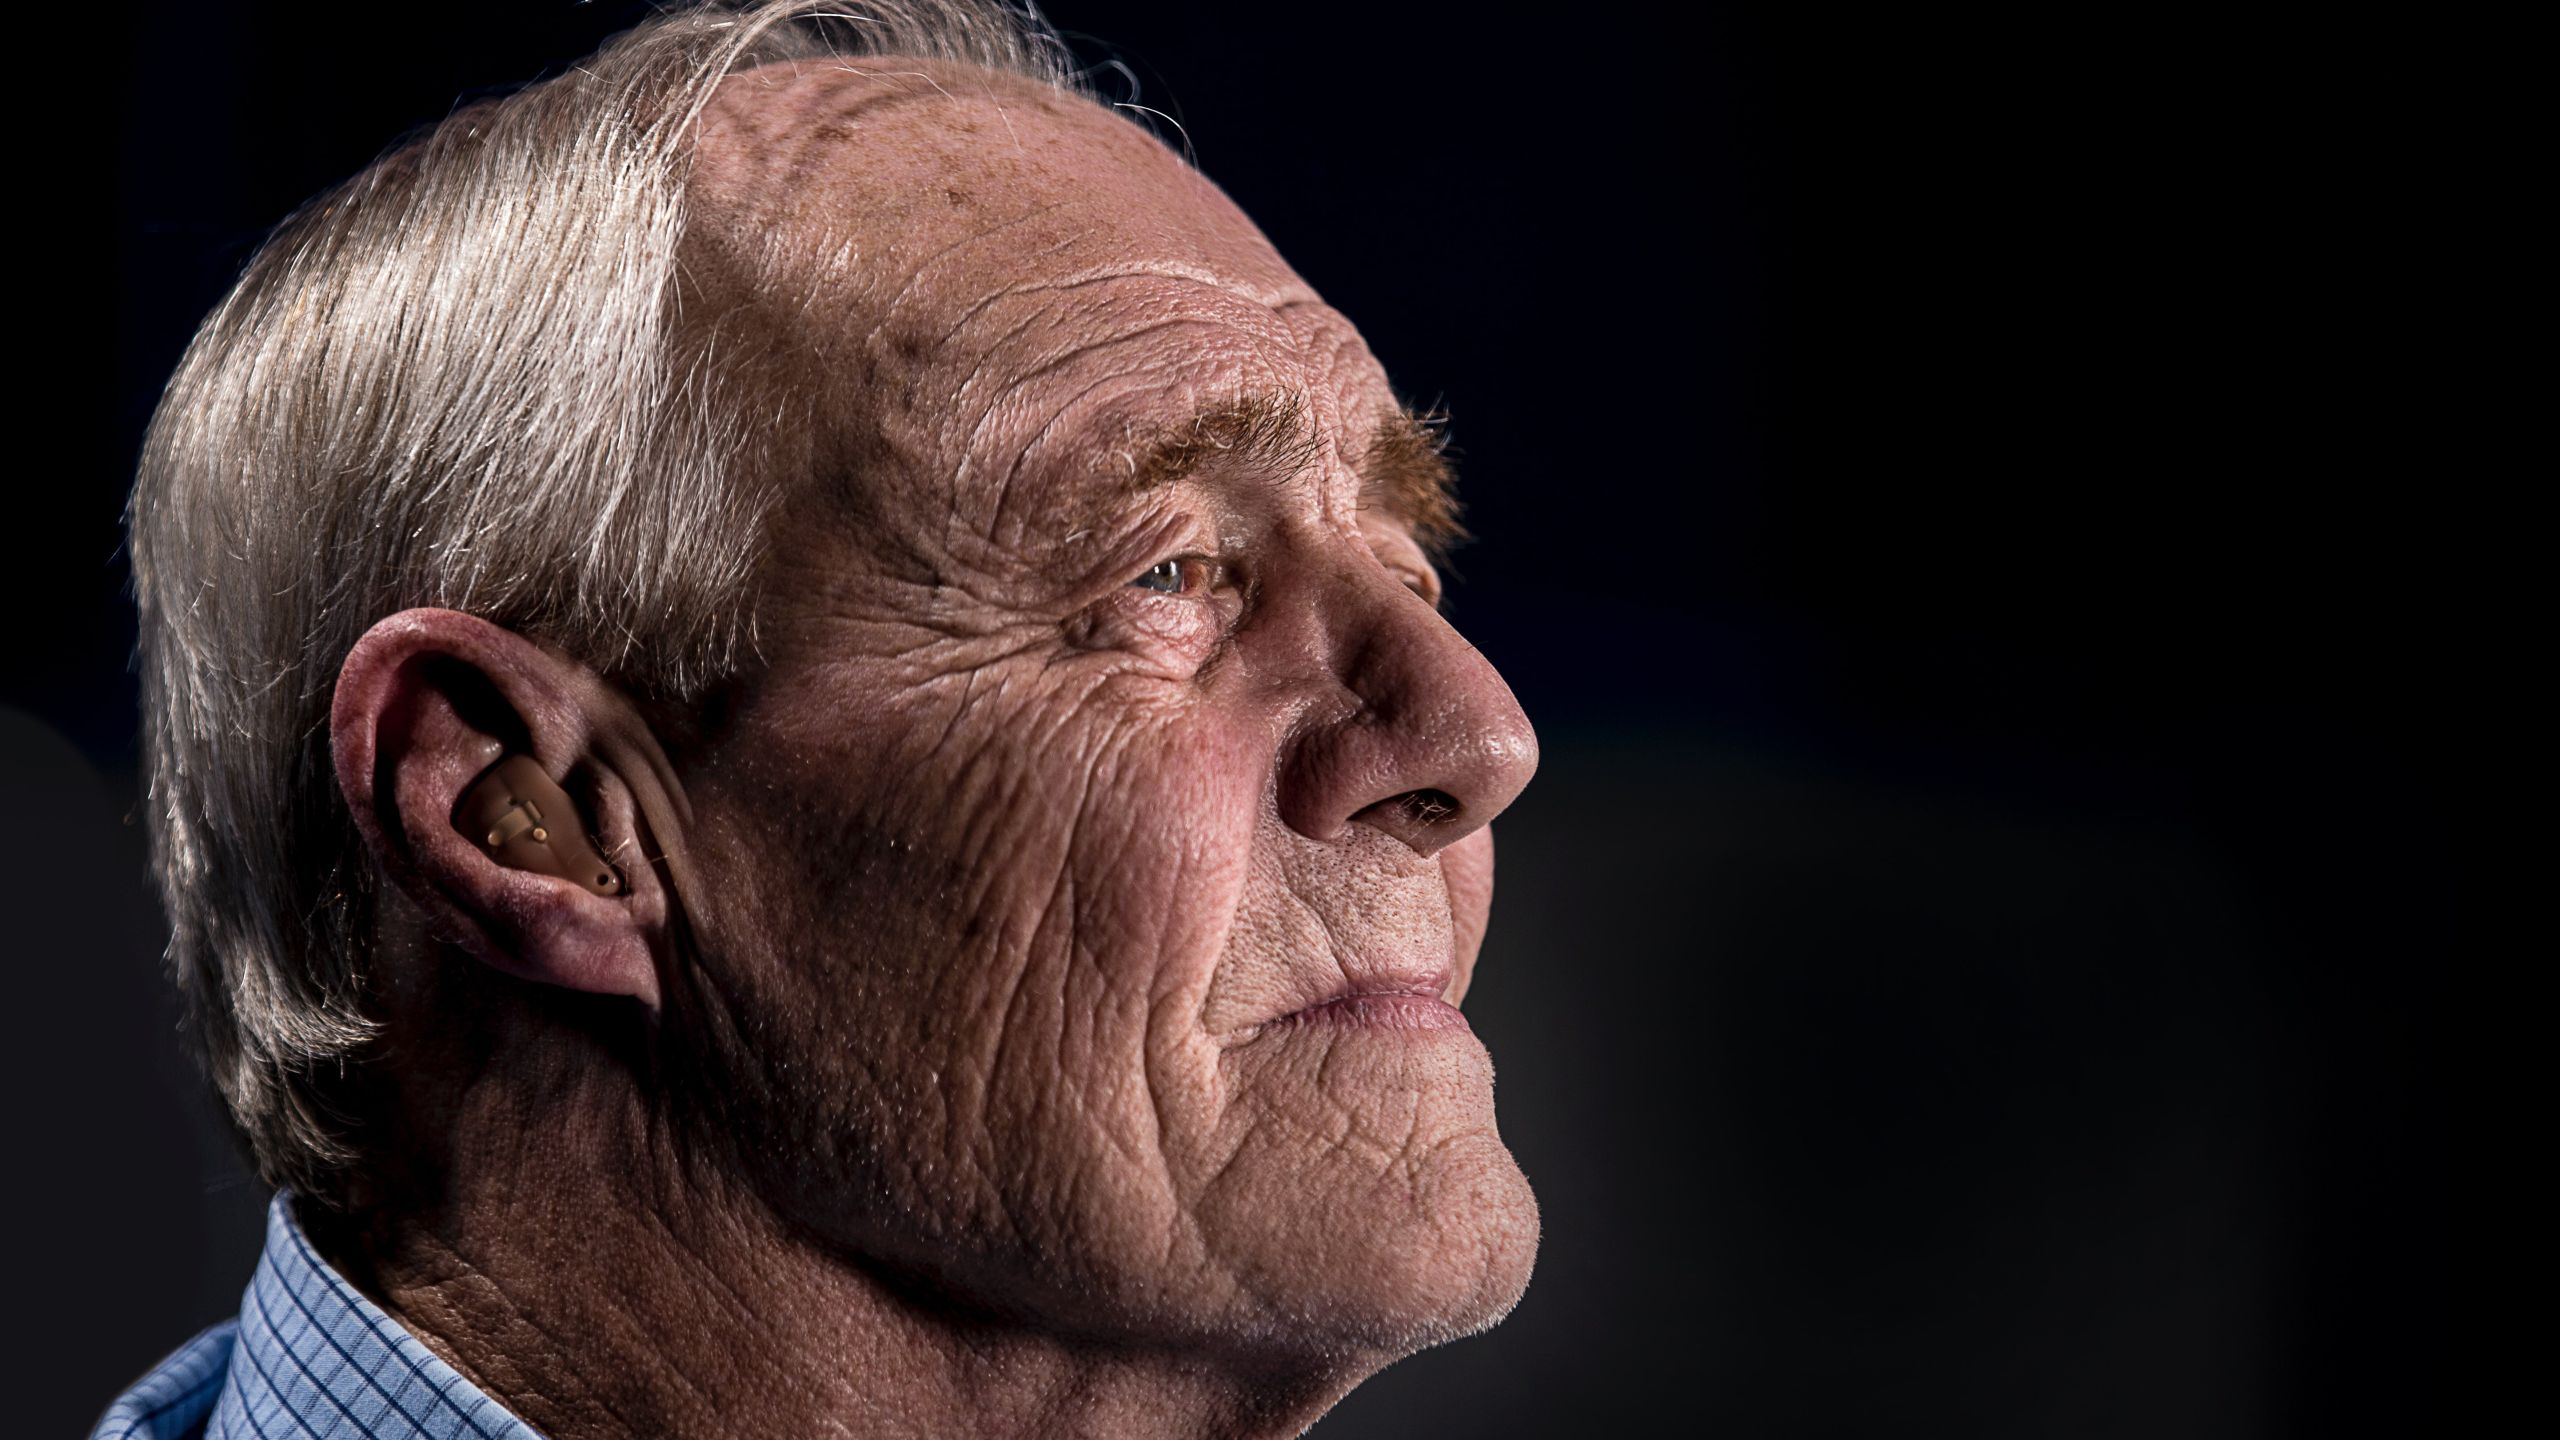 Elderly man with skin-colored ITE hearing aid.